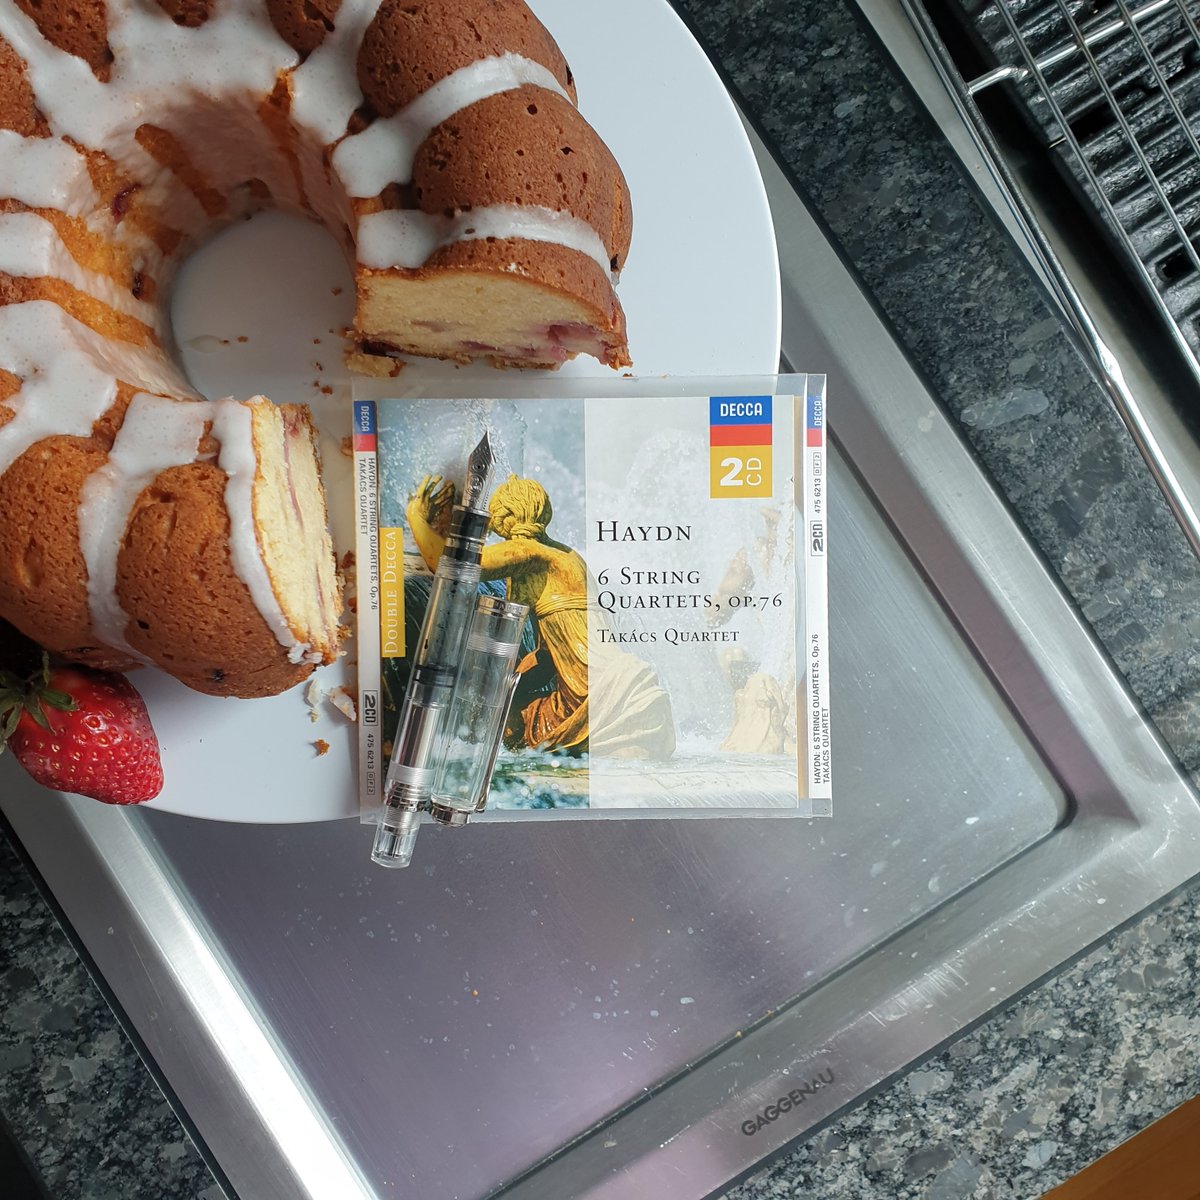 #morninglistening to the composer who takes the cake: JosephHaydn in his op.76 string quartets w/the TakácsQuartet on @deccaclassics. Which brings up the question of your fave recording of op.76, if you have one. Amazon: amzn.to/3UcTS8R #HaydnCuresAllProblems